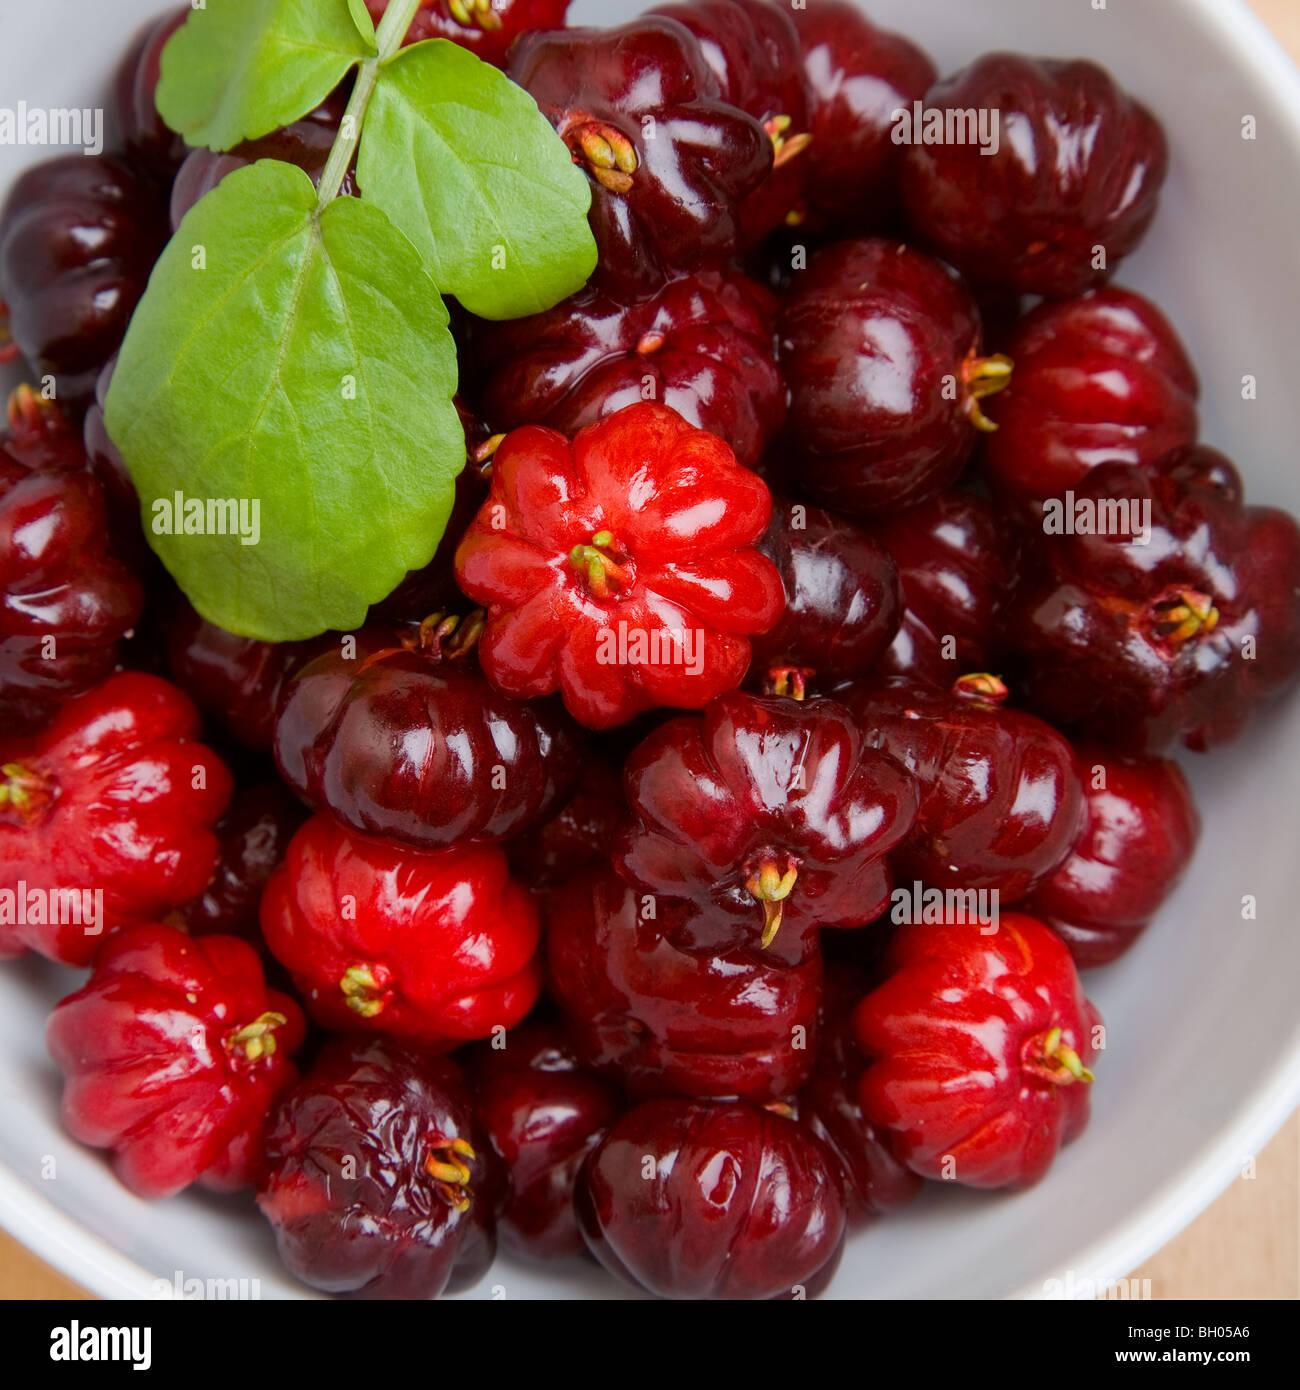 A bowl of pitangas or Surinam Cherries, the fruit from the Eugenia uniflora tree, Stock Photo